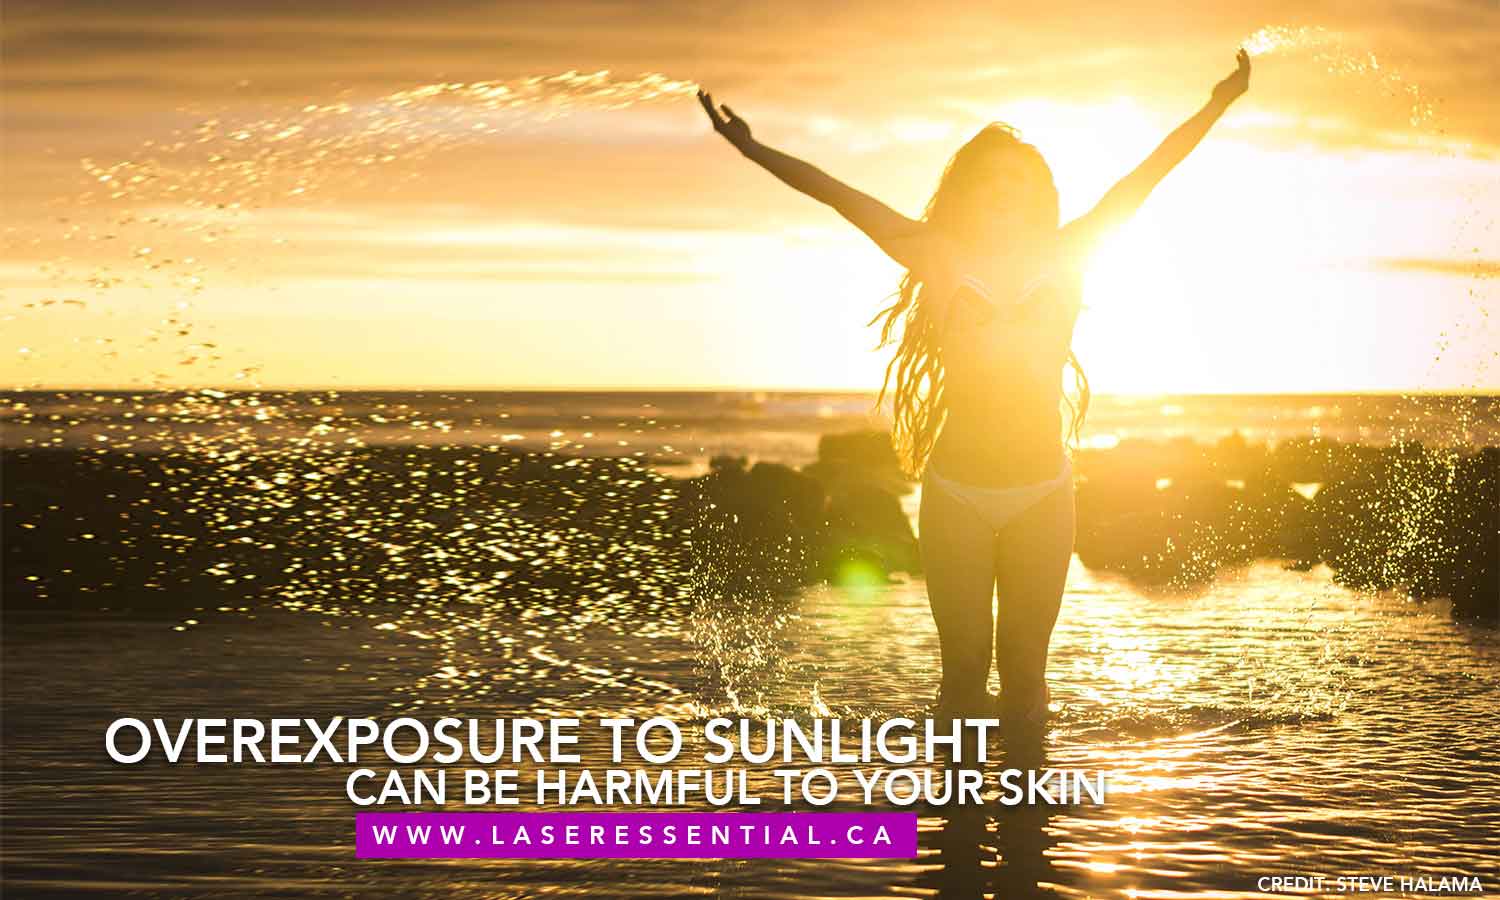 Overexposure to sunlight can be harmful to your skin